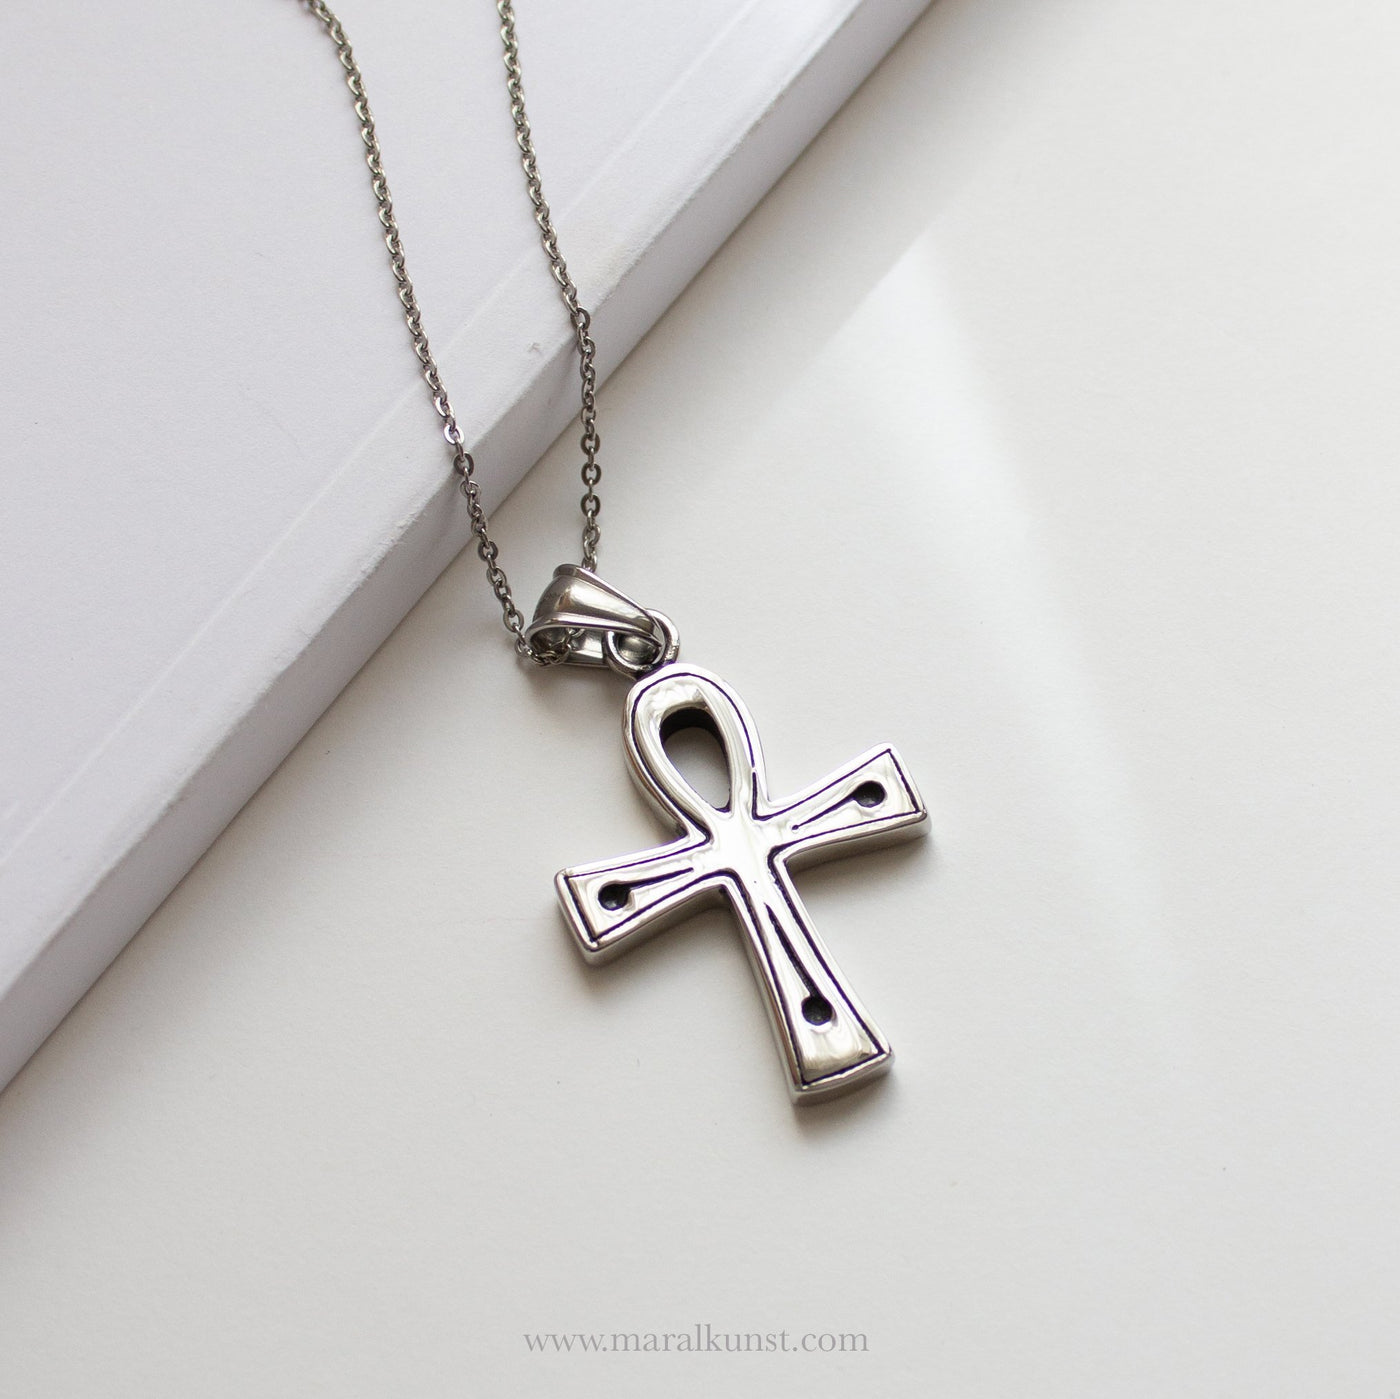 Cross Stainless Steel Necklace - Maral Kunst Jewelry